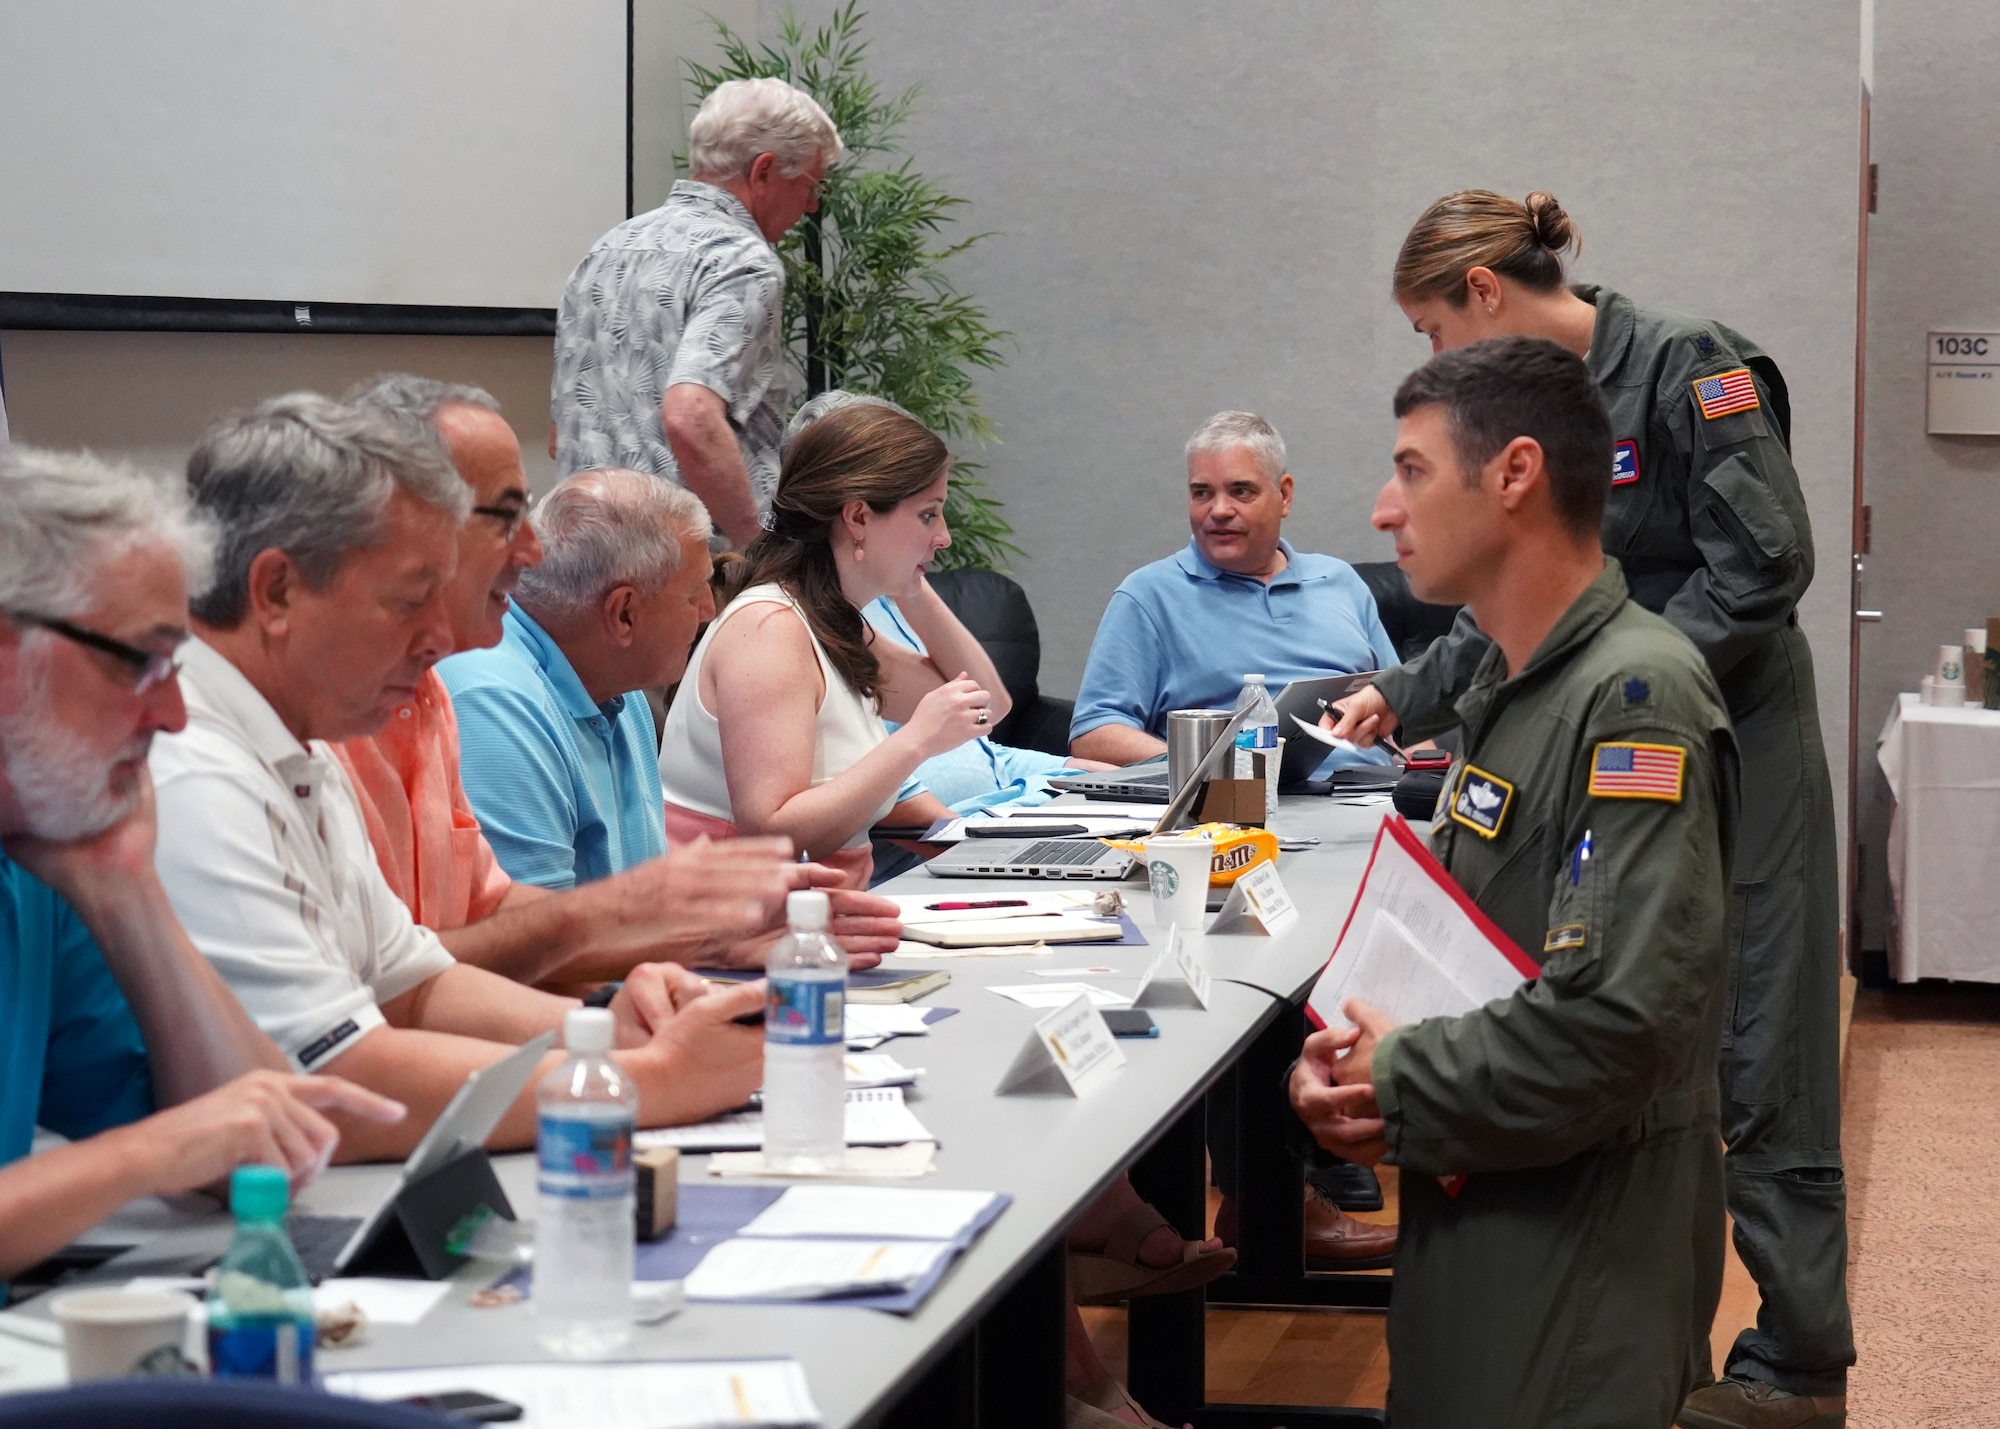 The National Commission on Military Aviation Safety greets Total Force Integration Squadron Commanders at Joint Base Pearl Harbor-Hickam, Hawaii, Nov. 1, 2019. The NCMAS was put together by Congress to assess military installations and report back with findings on how to increase safety and mission readiness. The visit to Hickam was significant due to the active duty and guard Total Force Integration of Hickam Airfield. (U.S. Air Force photo by Airman 1st Class Erin Baxter)